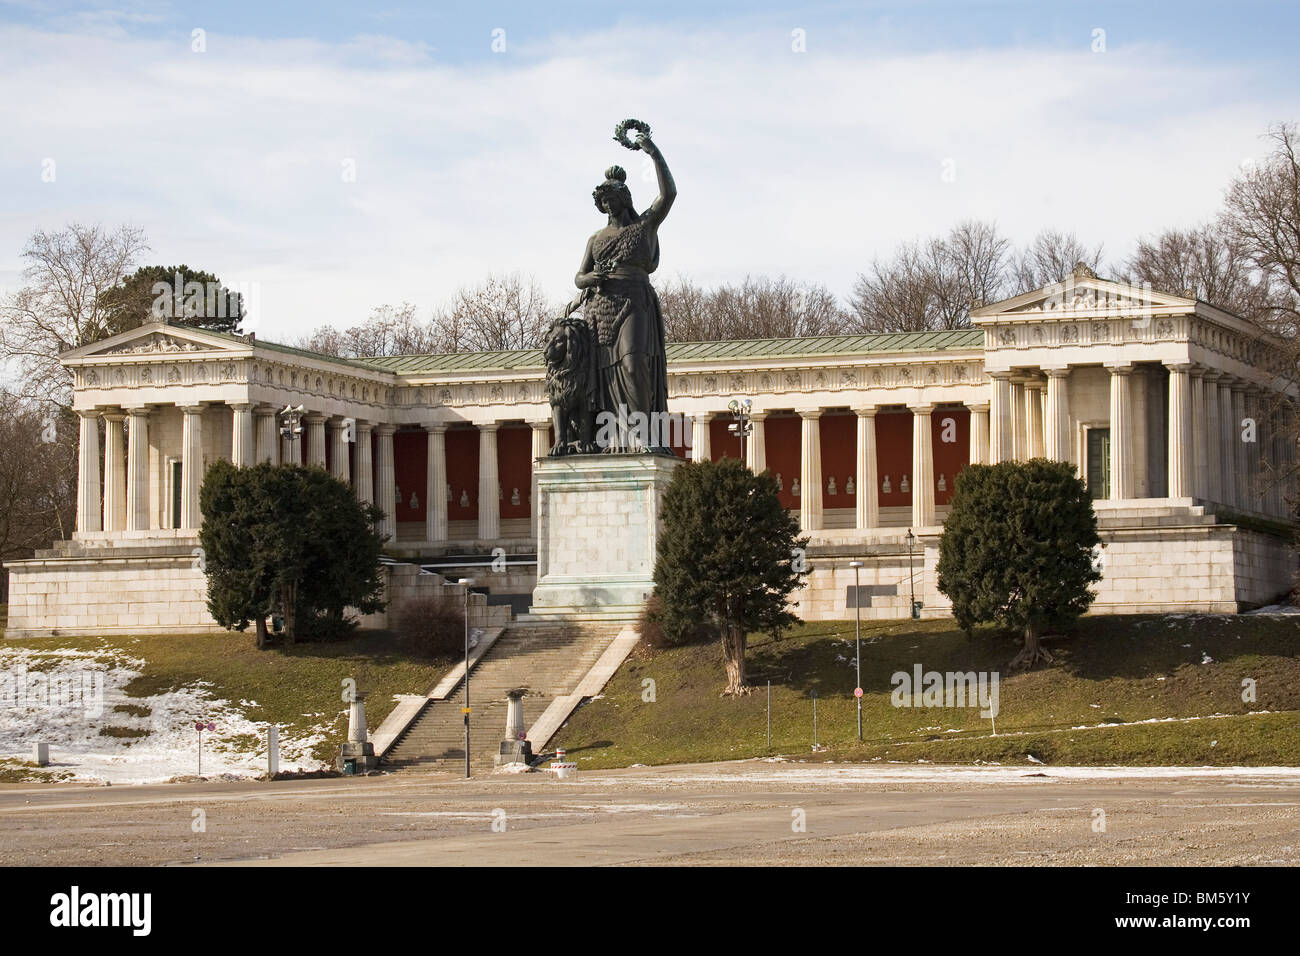 The statue of the goddess Bavaria (Tellus Bavarica) by the Ruhmeshalle in Munich, Germany. Stock Photo